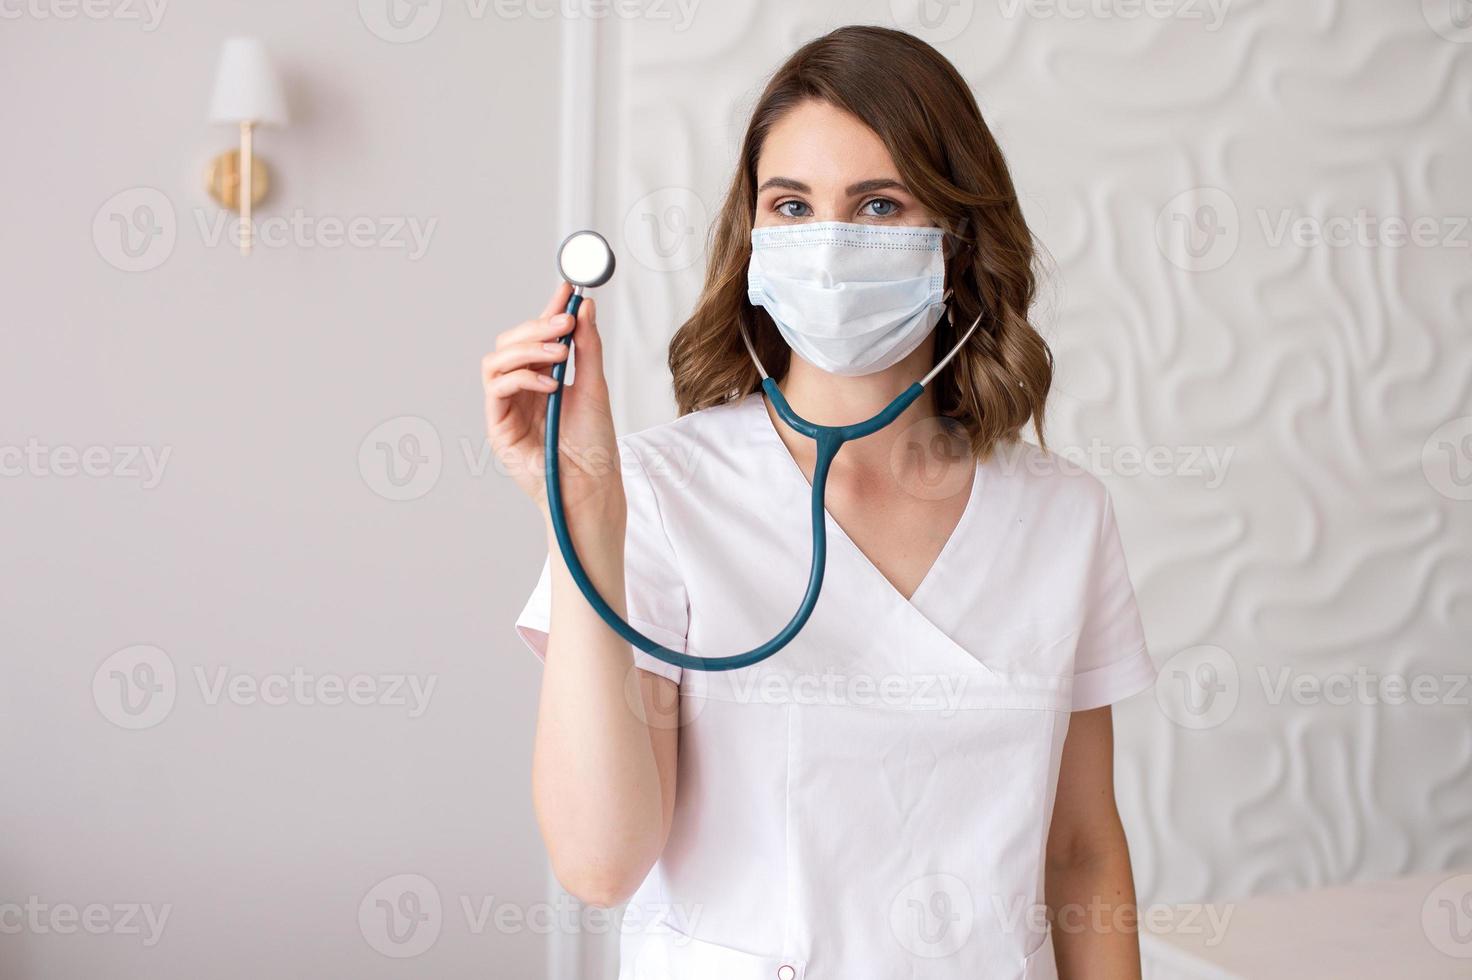 Cute girl doctor in a medical mask shows a stethoscope photo